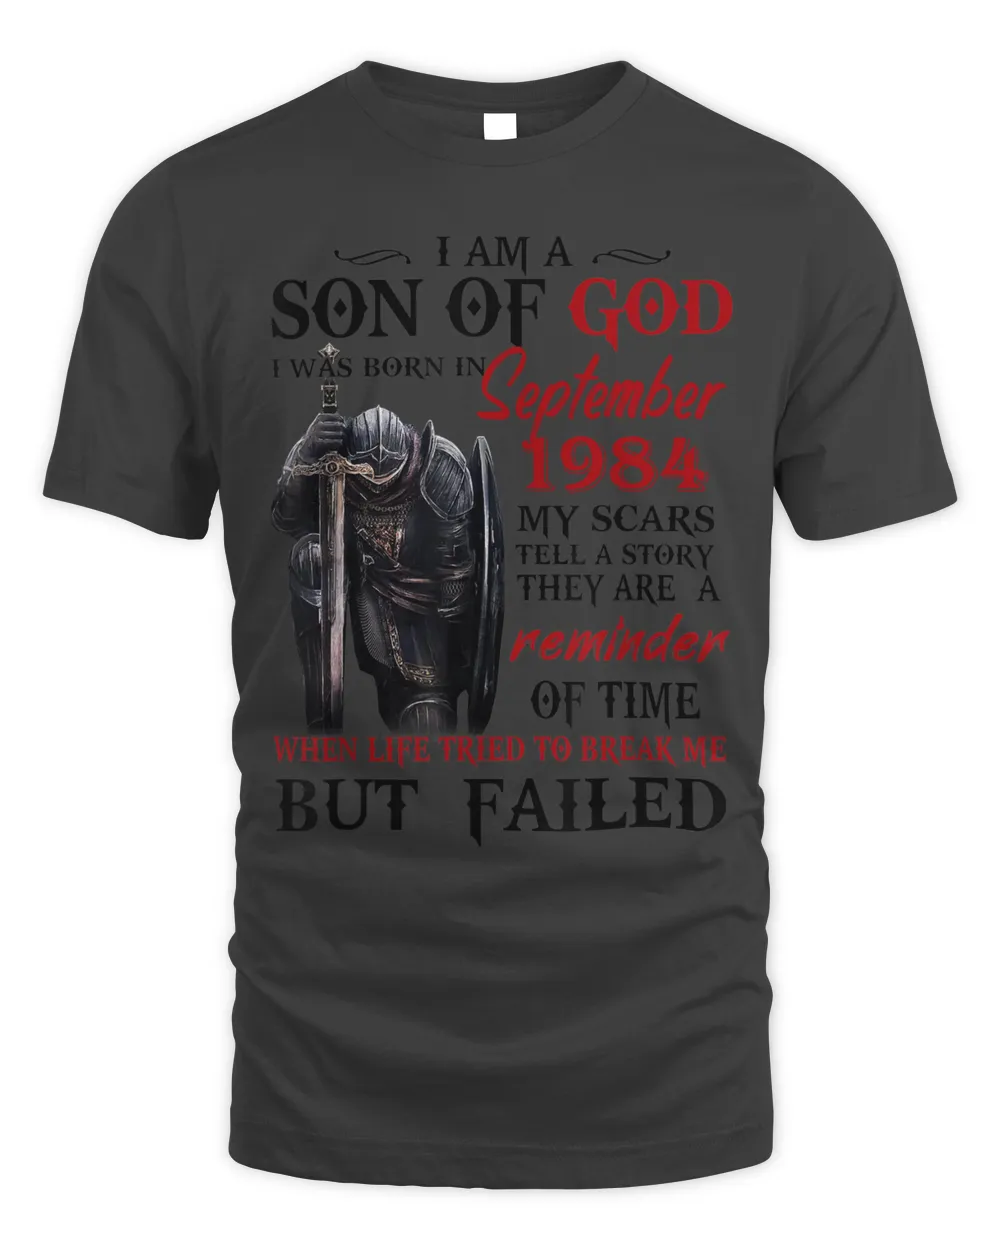 Personalized Warrior of God Shirts I Am A Son Of God I Was Born In Customize Month & Year